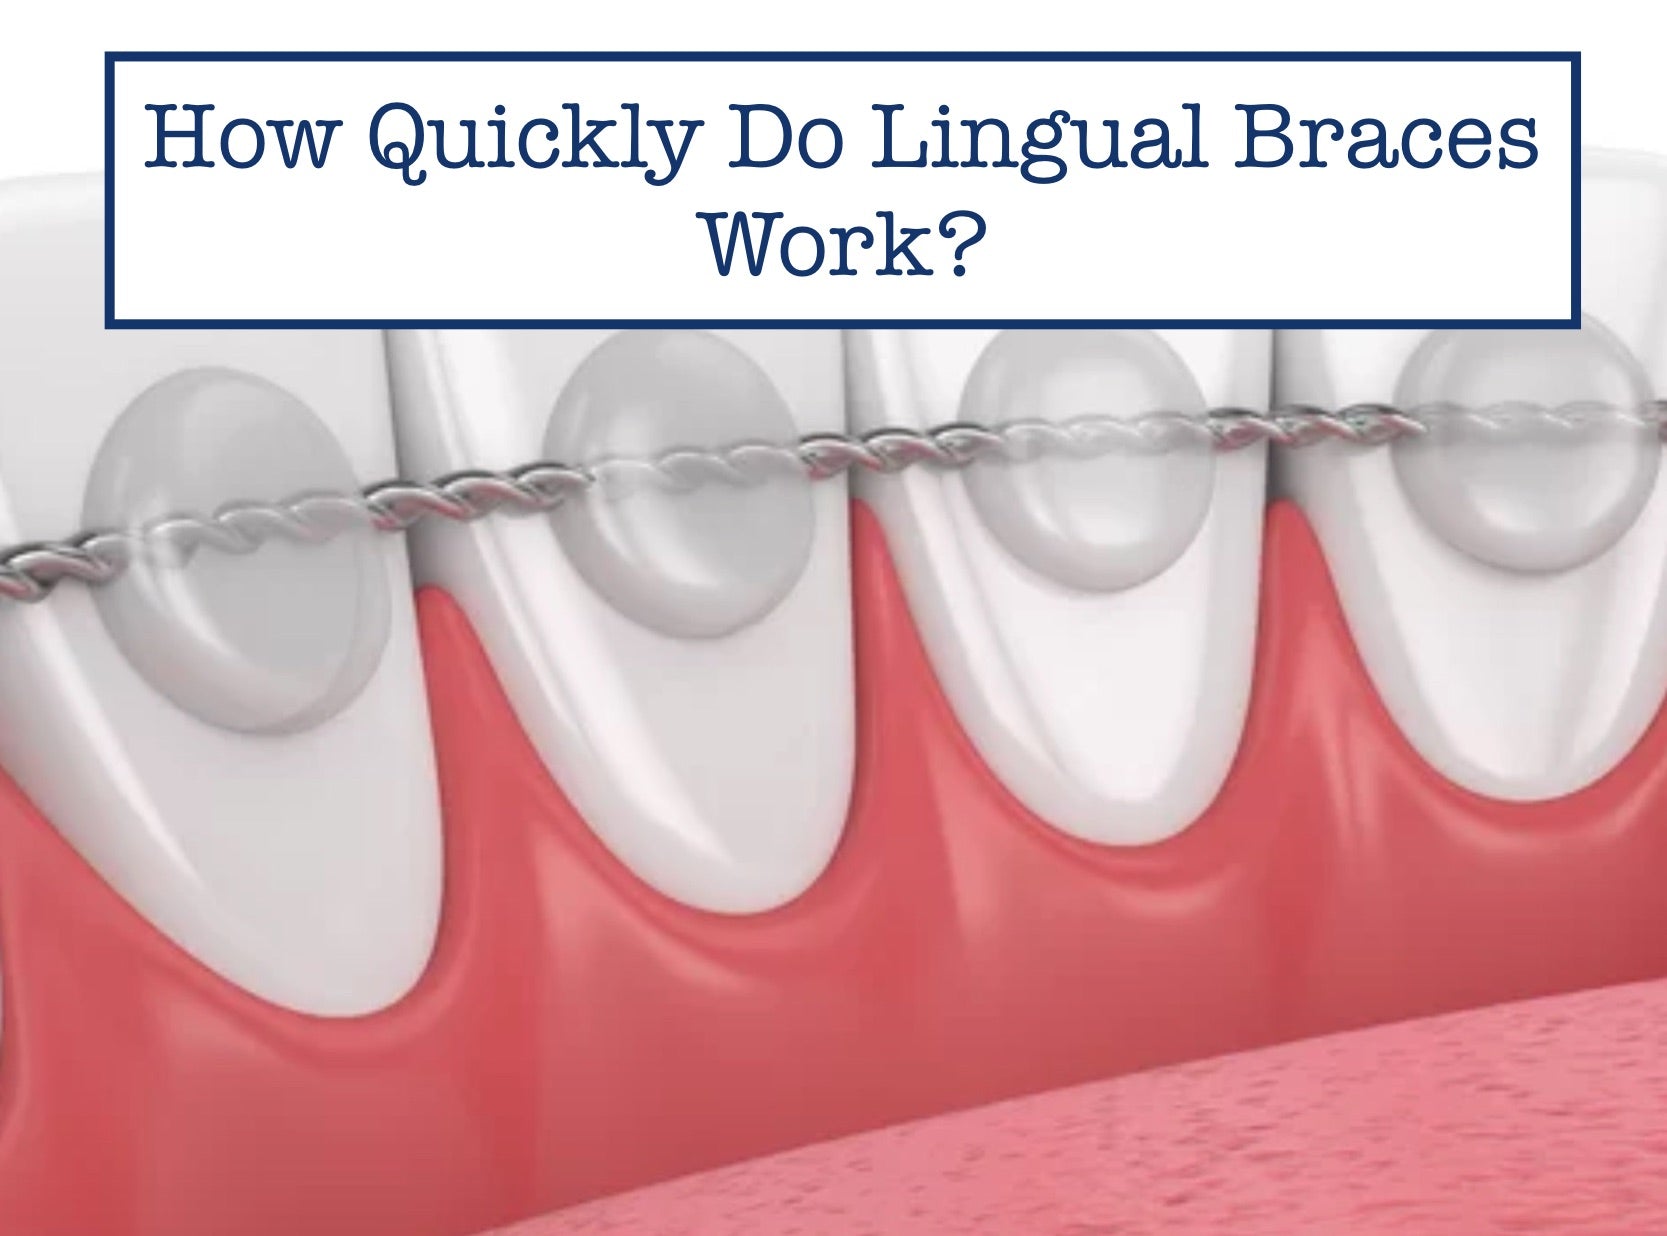 What Are Lingual Braces and How Do They Work? - FitSmiles